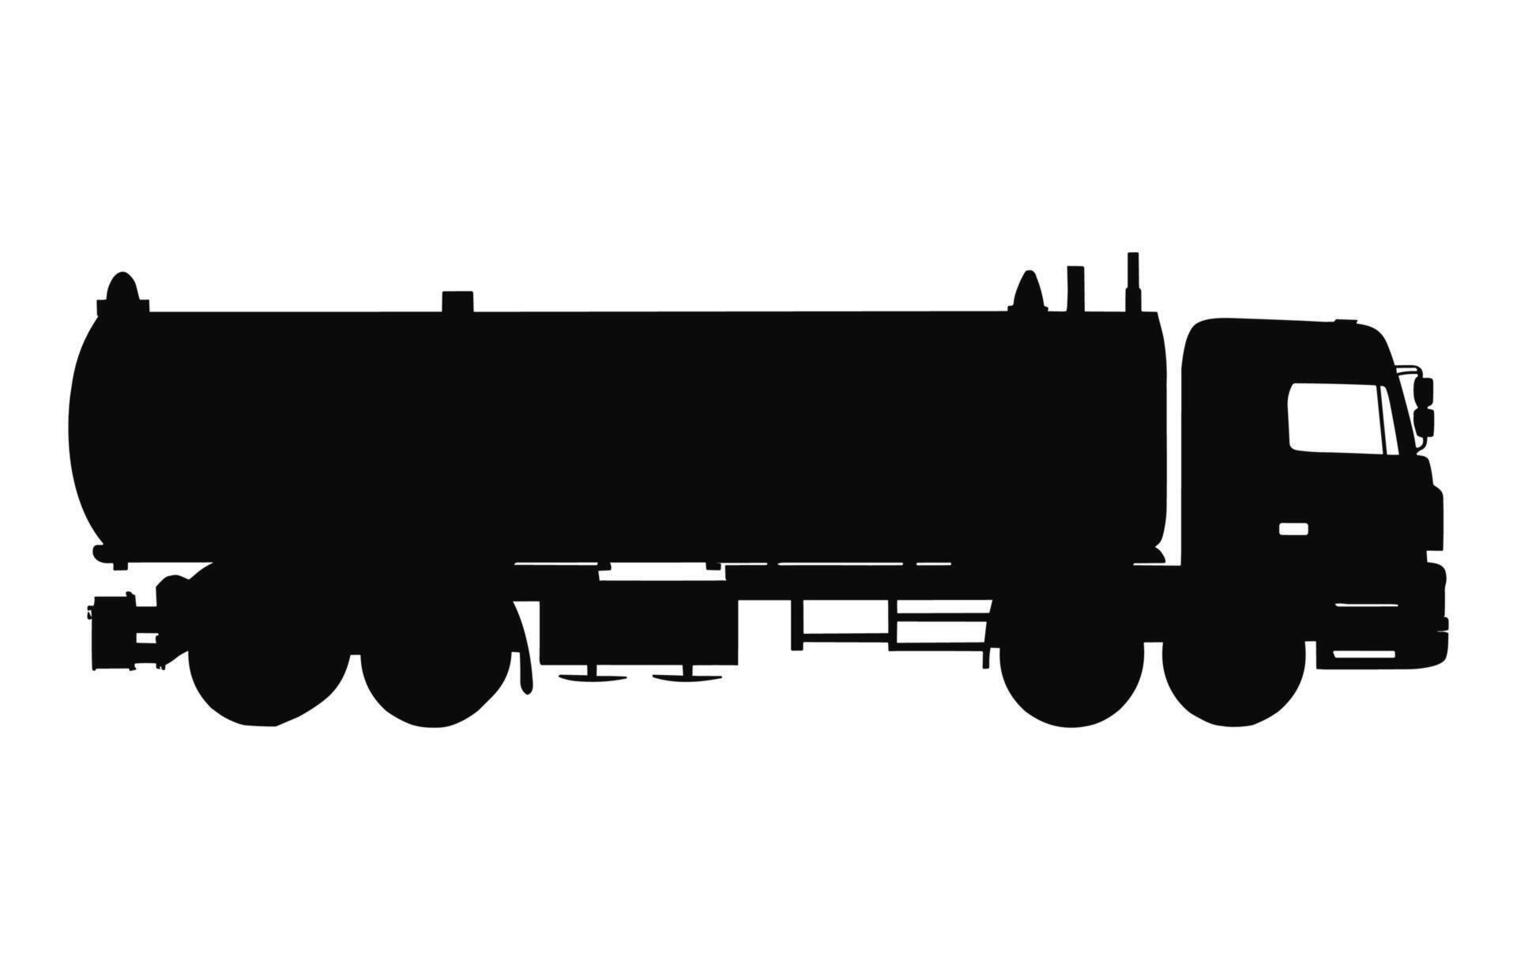 Tanker Truck black silhouette vector, Fuel tank truck vector clipart isolated on a white background